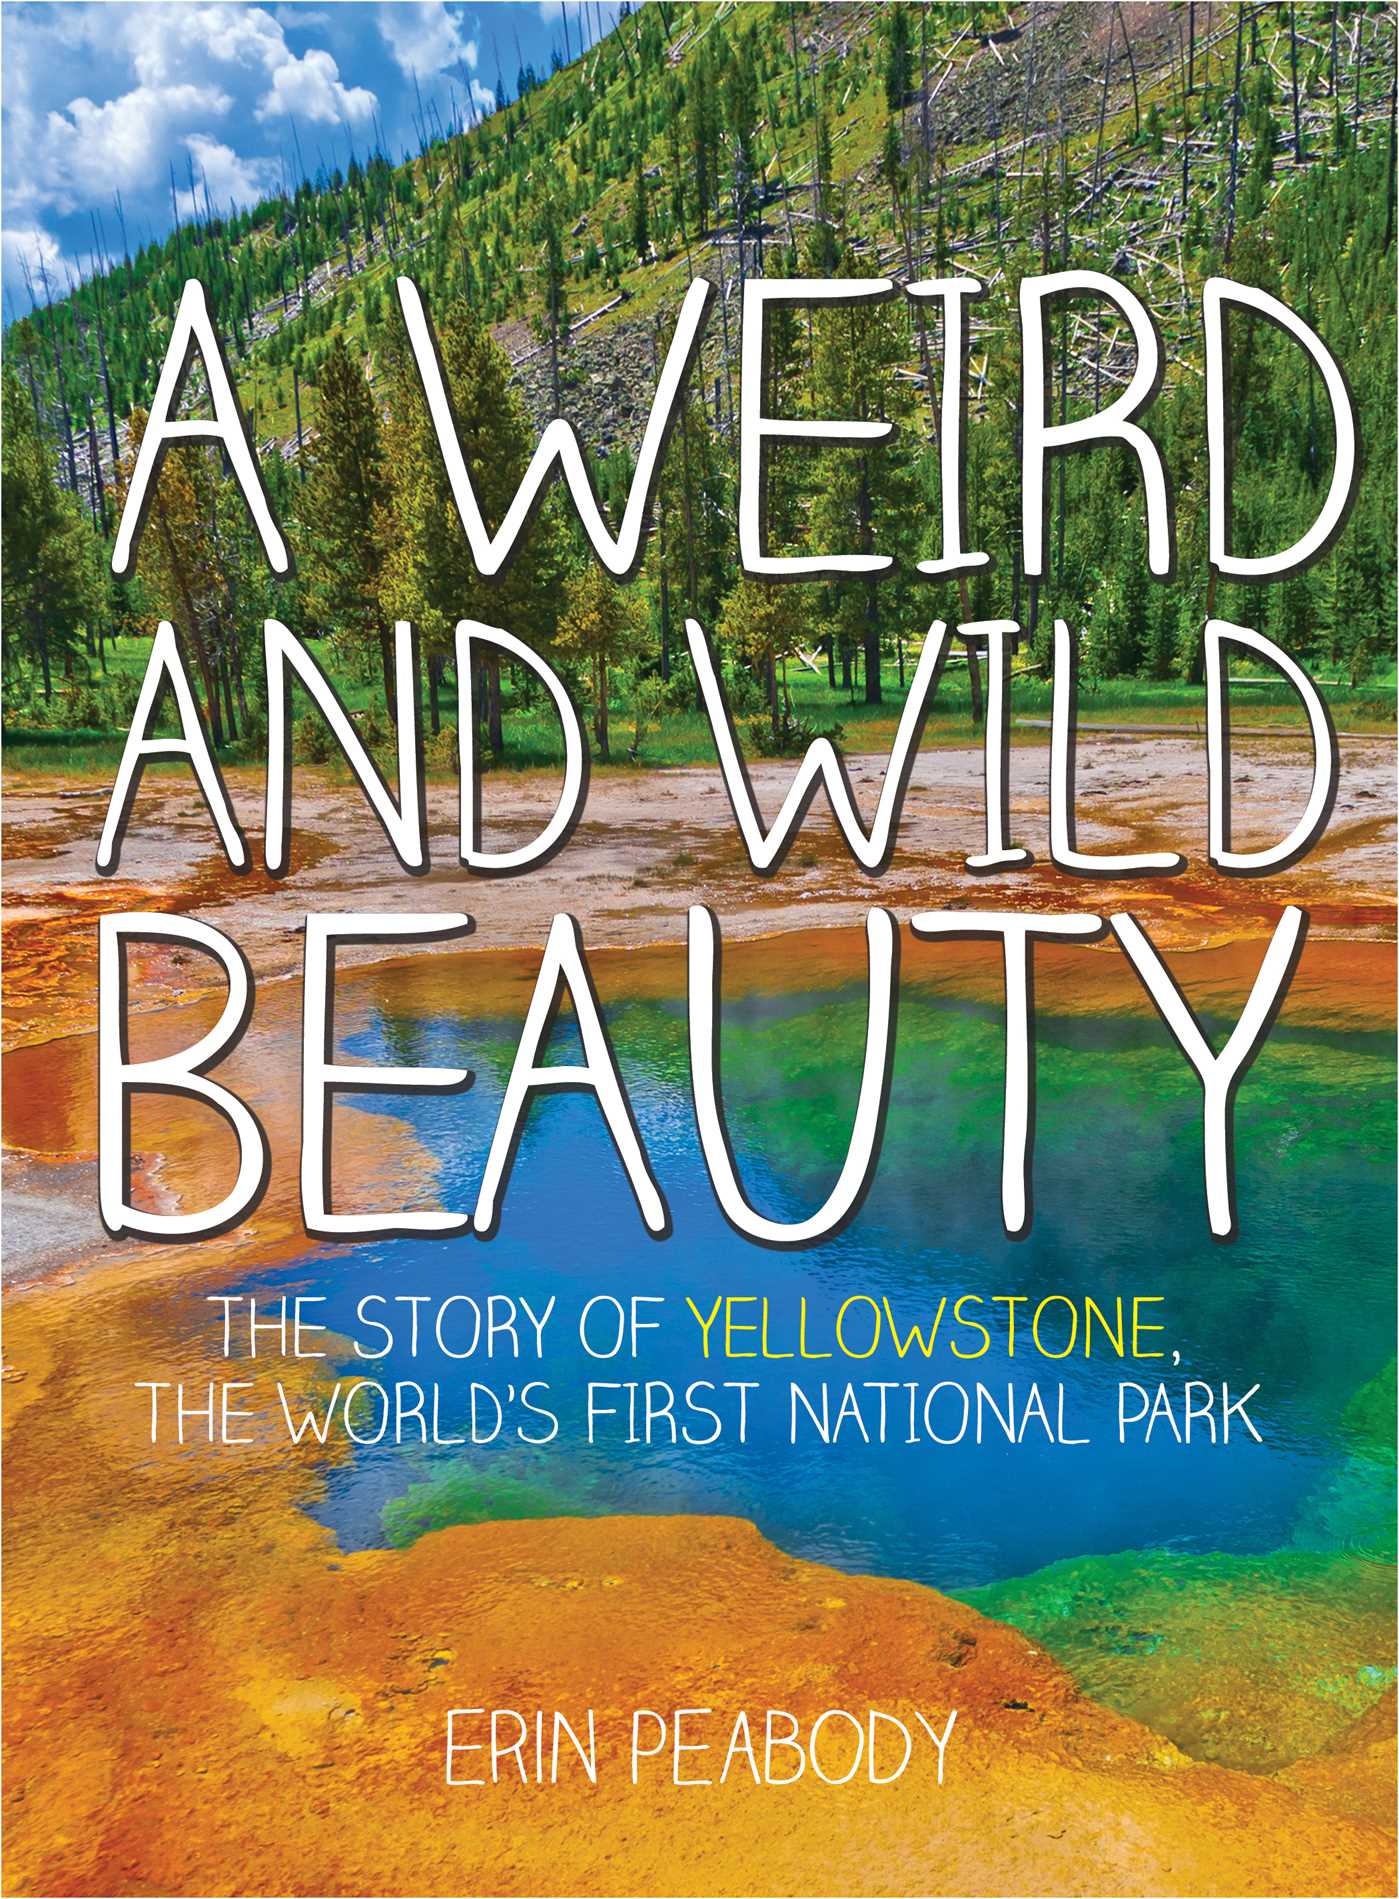 A Weird and Wild Beauty : The Story of Yellowstone, the World's First National Park